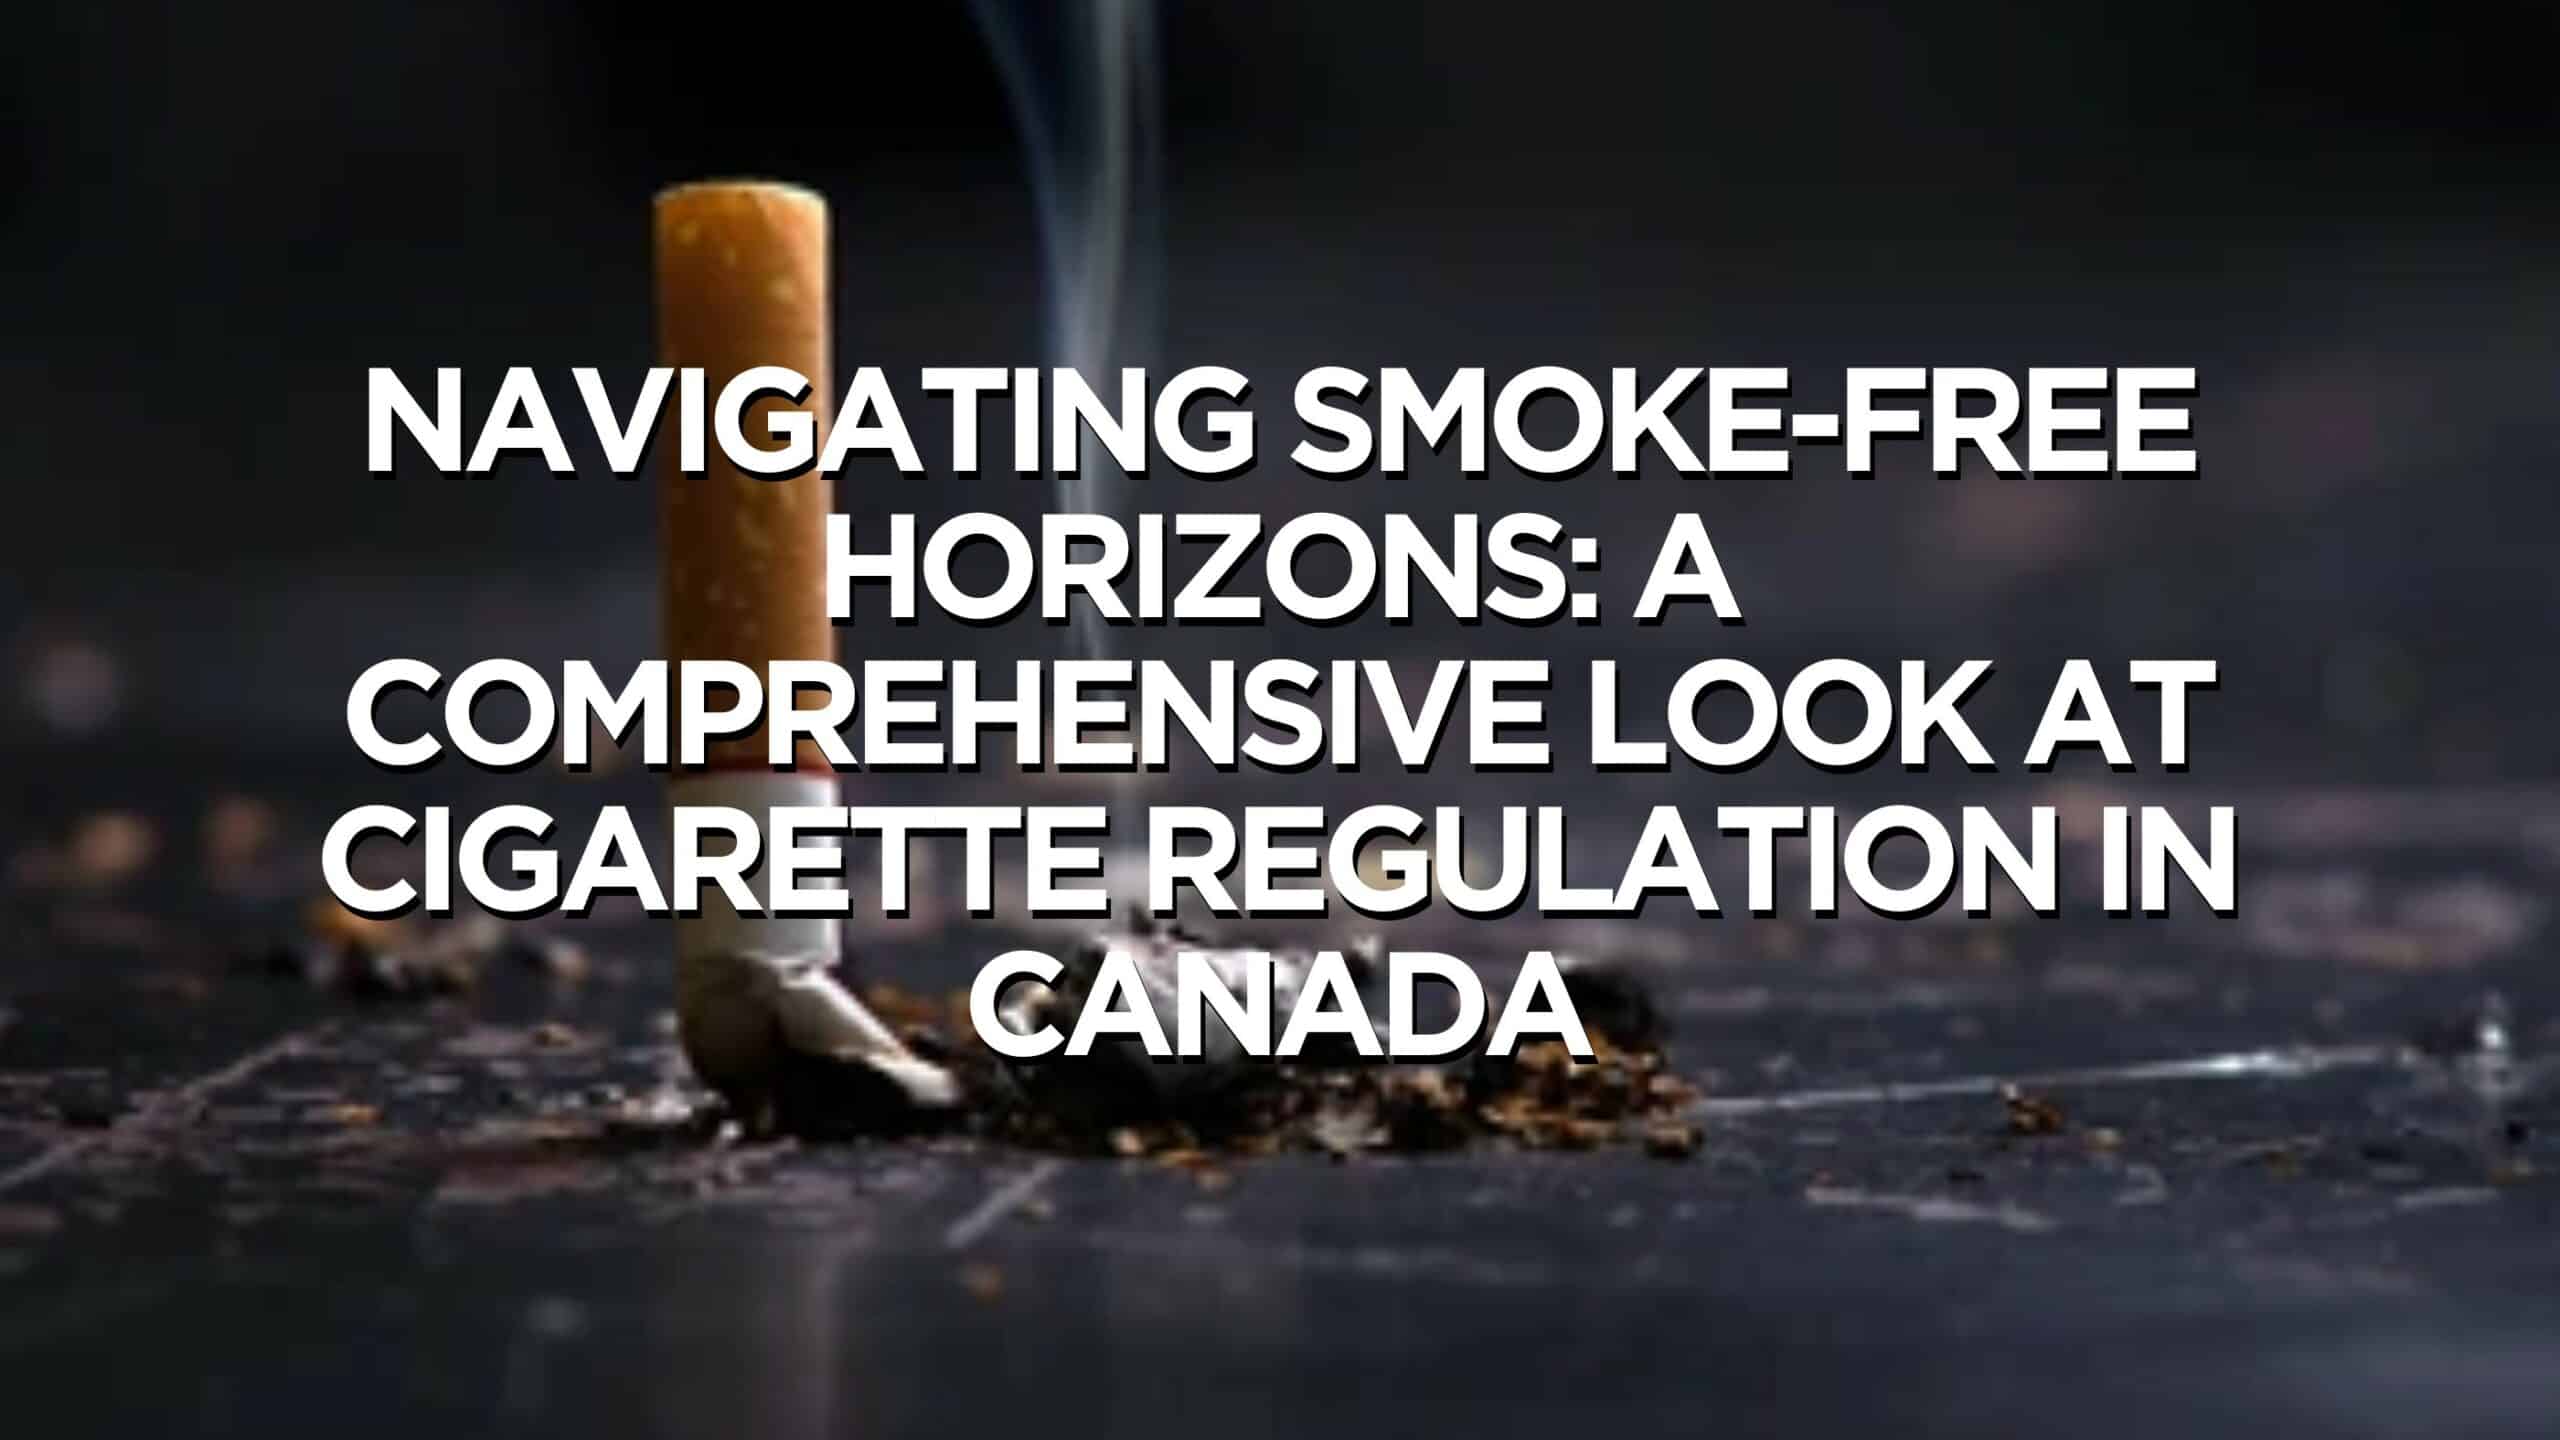 Navigating Smoke-Free Horizons: A Comprehensive Look at Cigarette Regulation in Canada